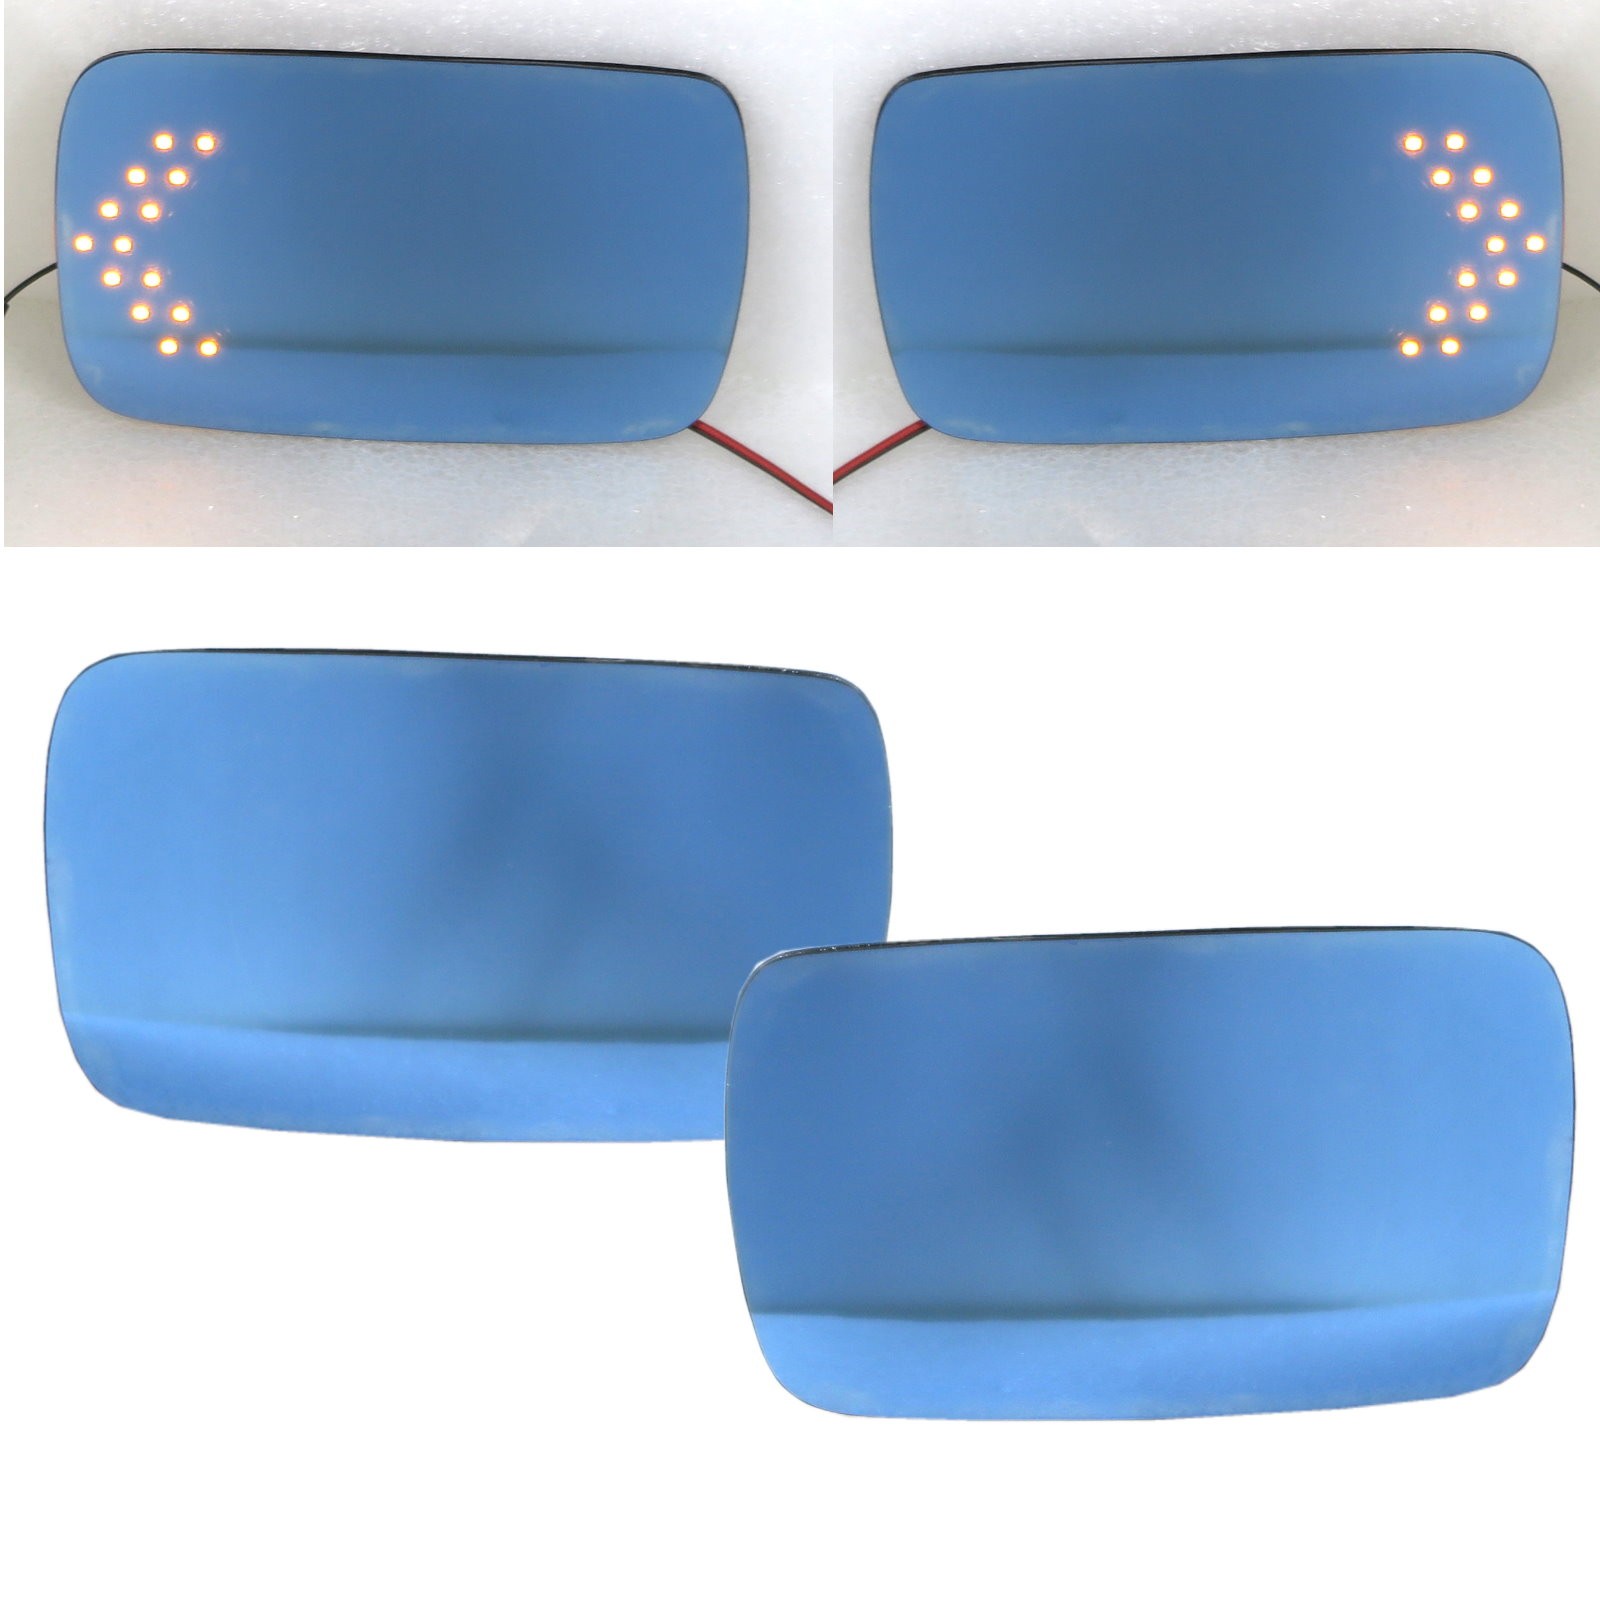 CrazyTheGod 3-Series E36 Third generation 1990-2000 Touring/Sedan/Coupe/Convertible 2D/4D/5D LED Signal Light Anti-Glare MIrror Glass Blue for BMW